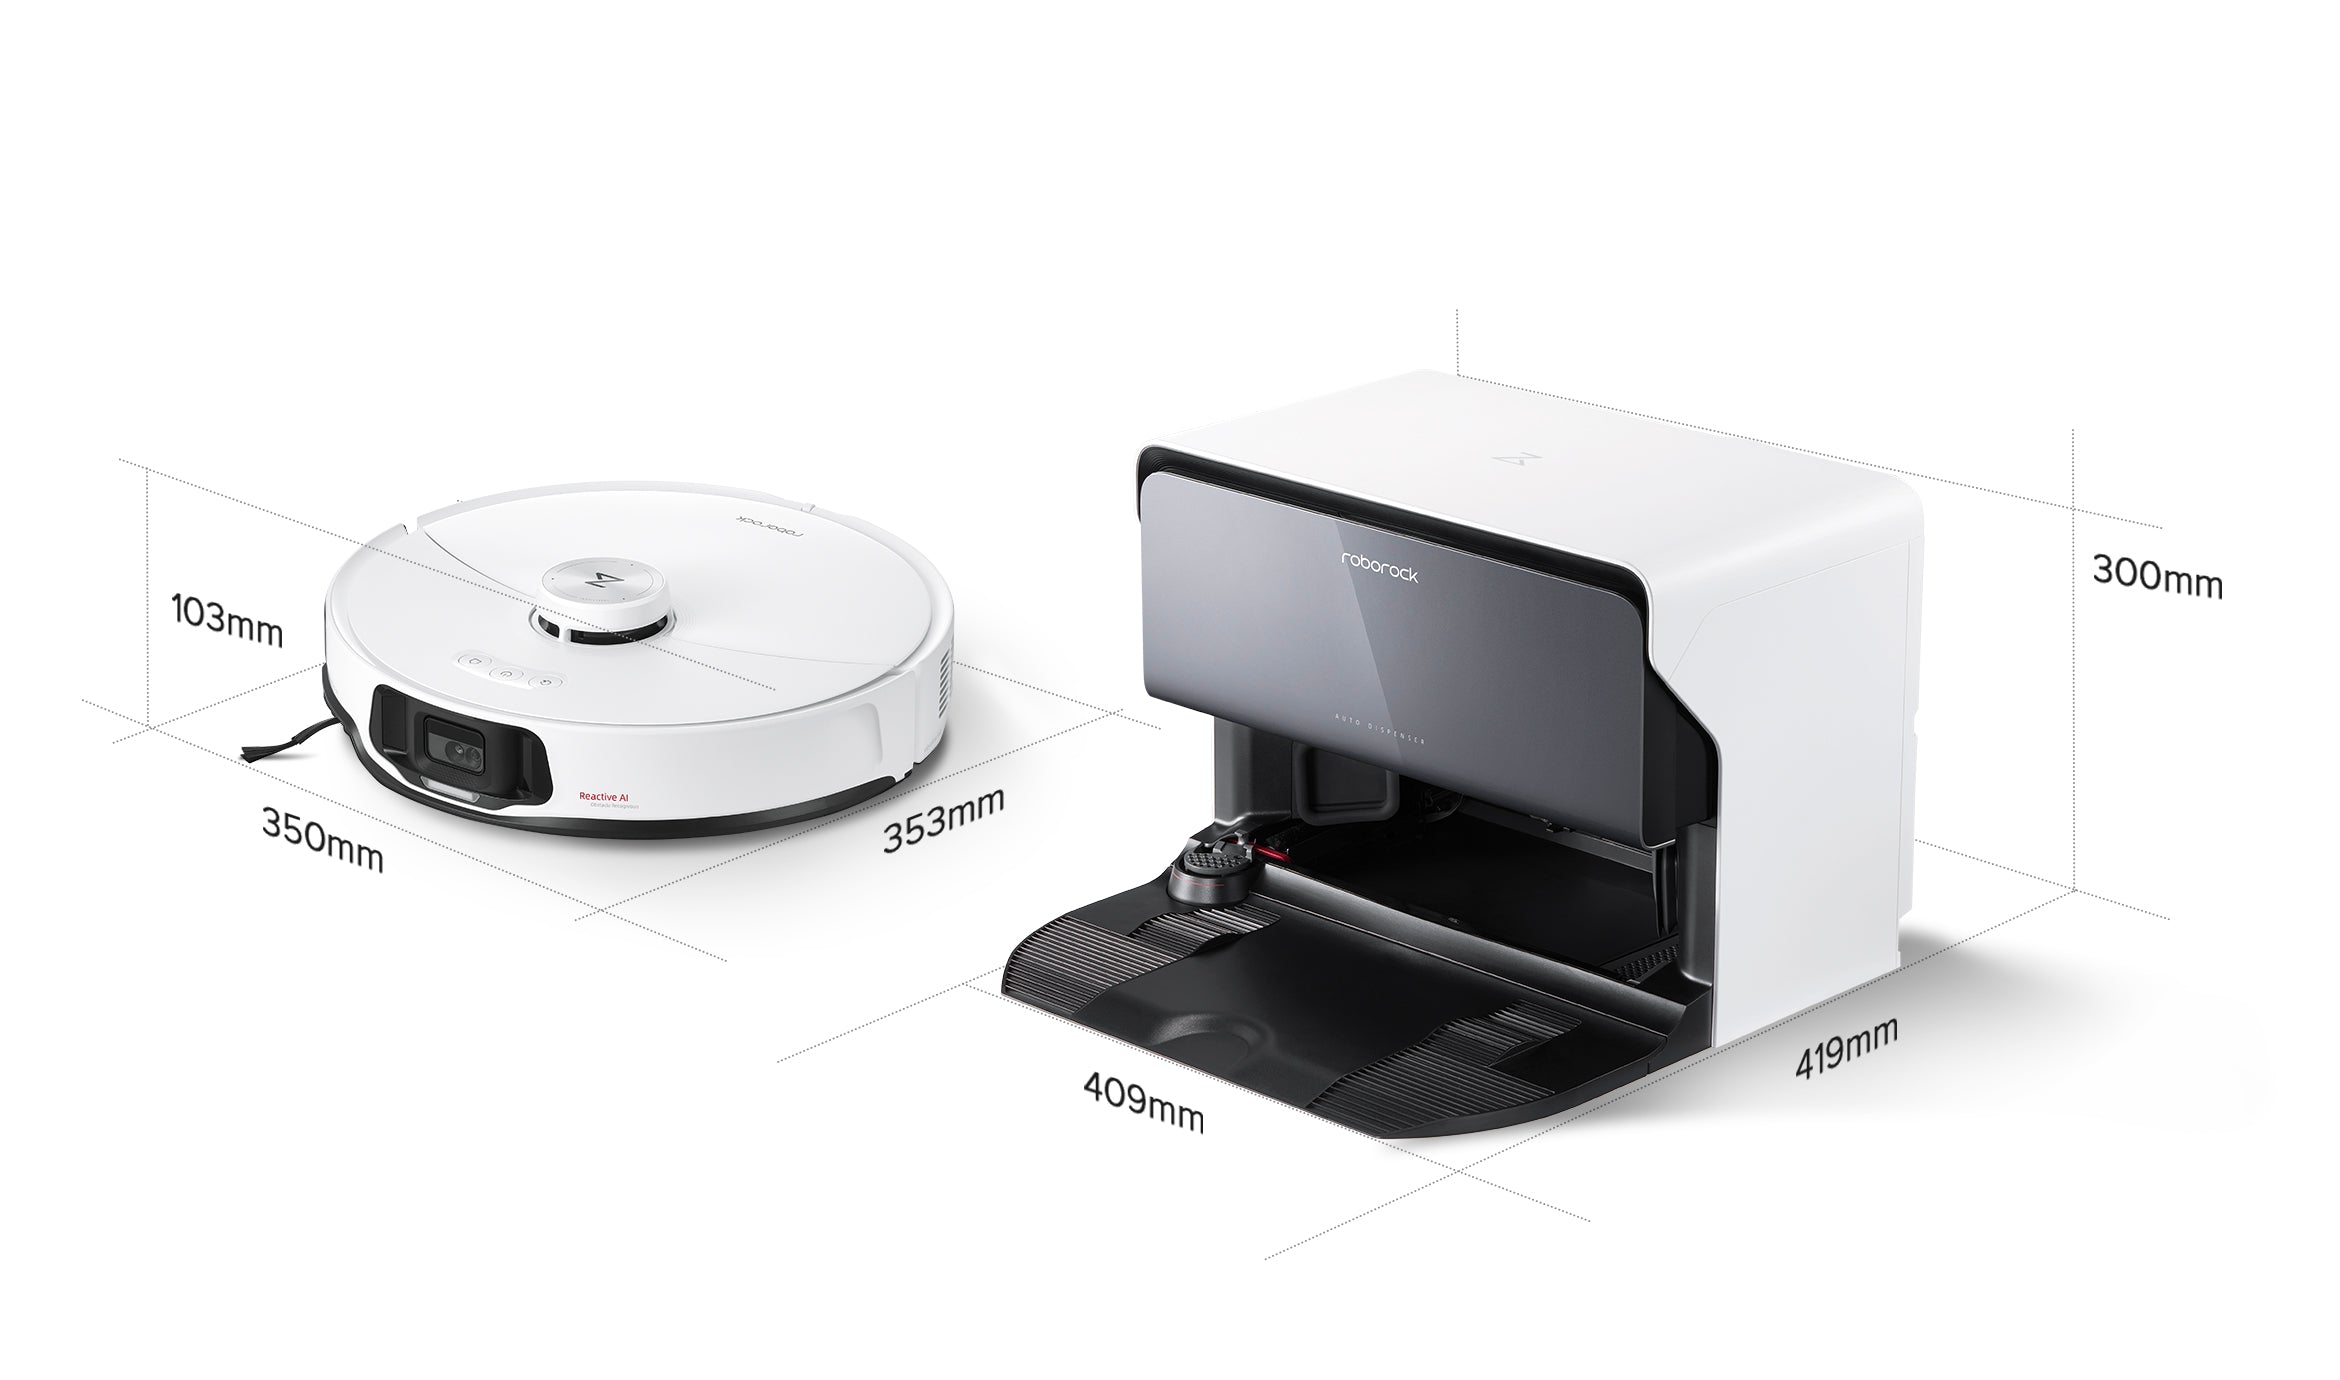 Roborock S8 MaxV Ultra launched: built-in voice assistant and Matter  support - Vacuumtester